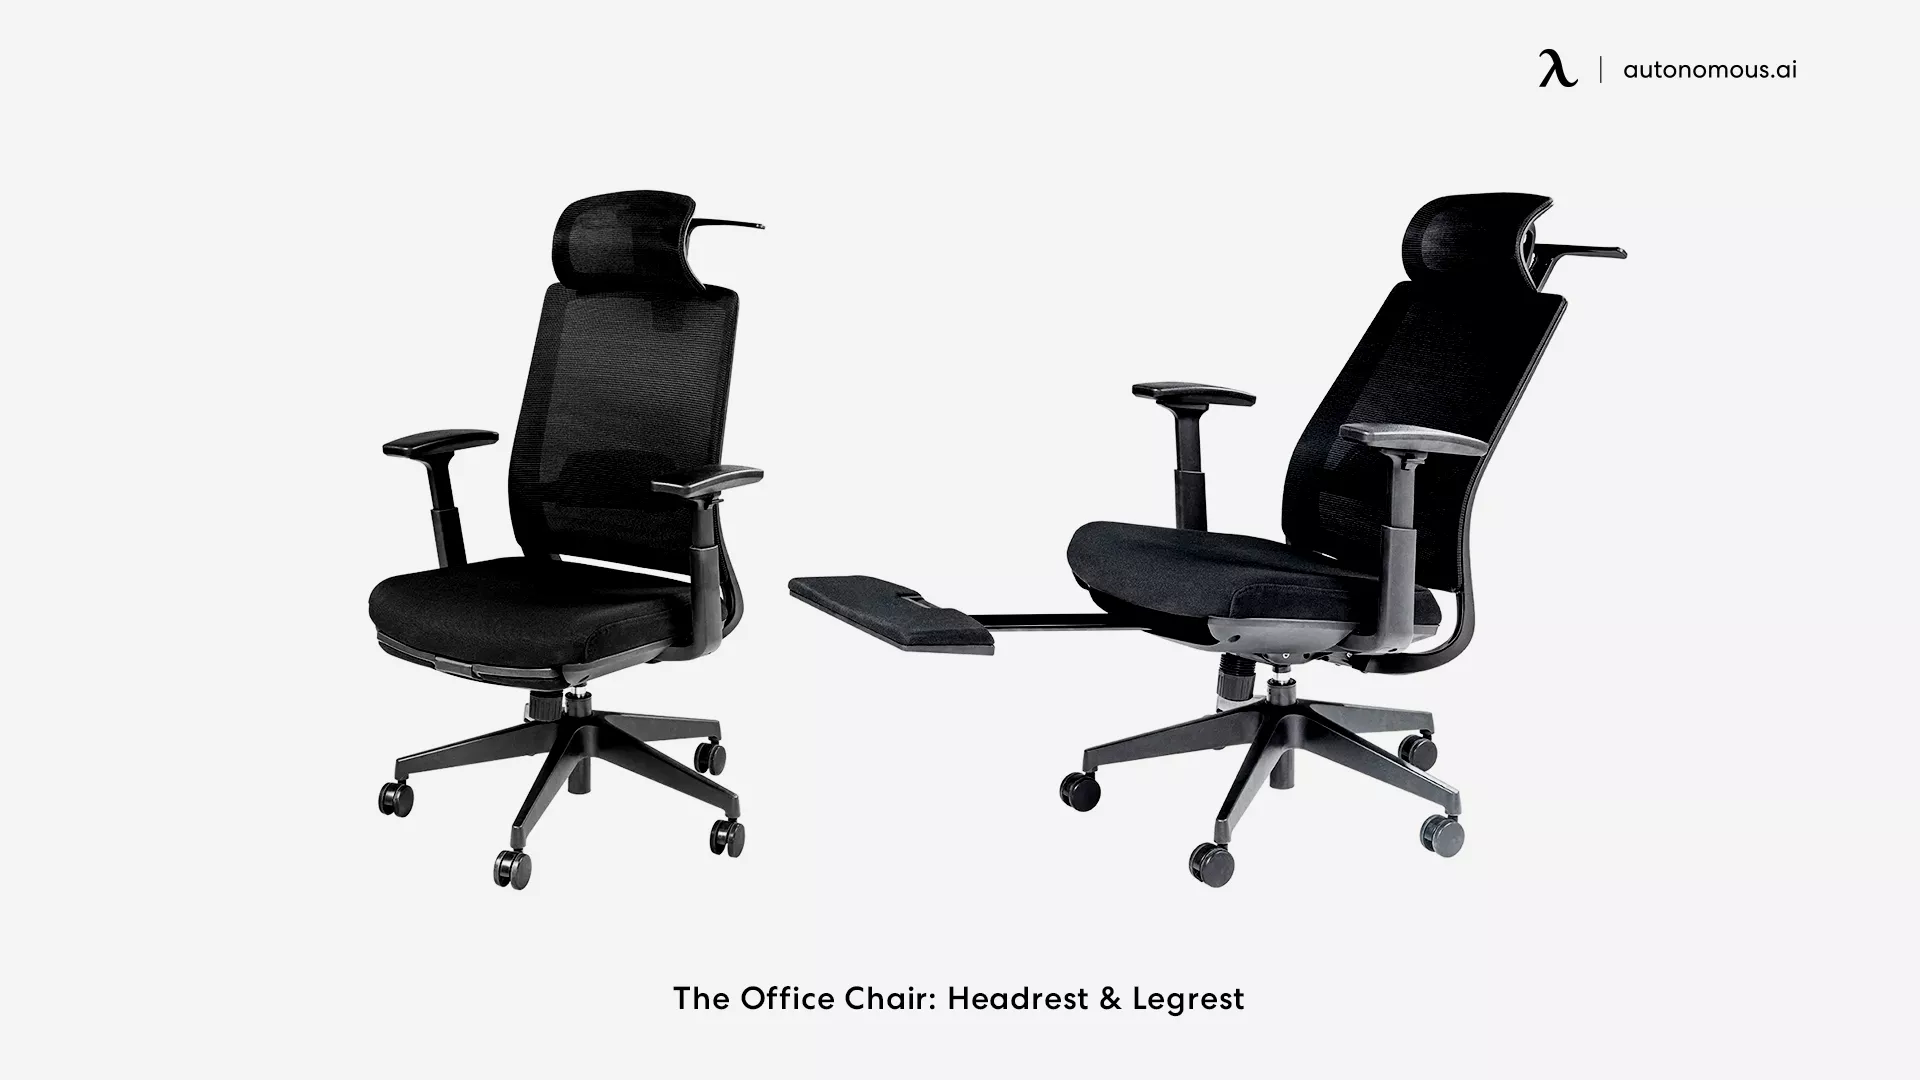 Basic Office Chair by FinerCrafts